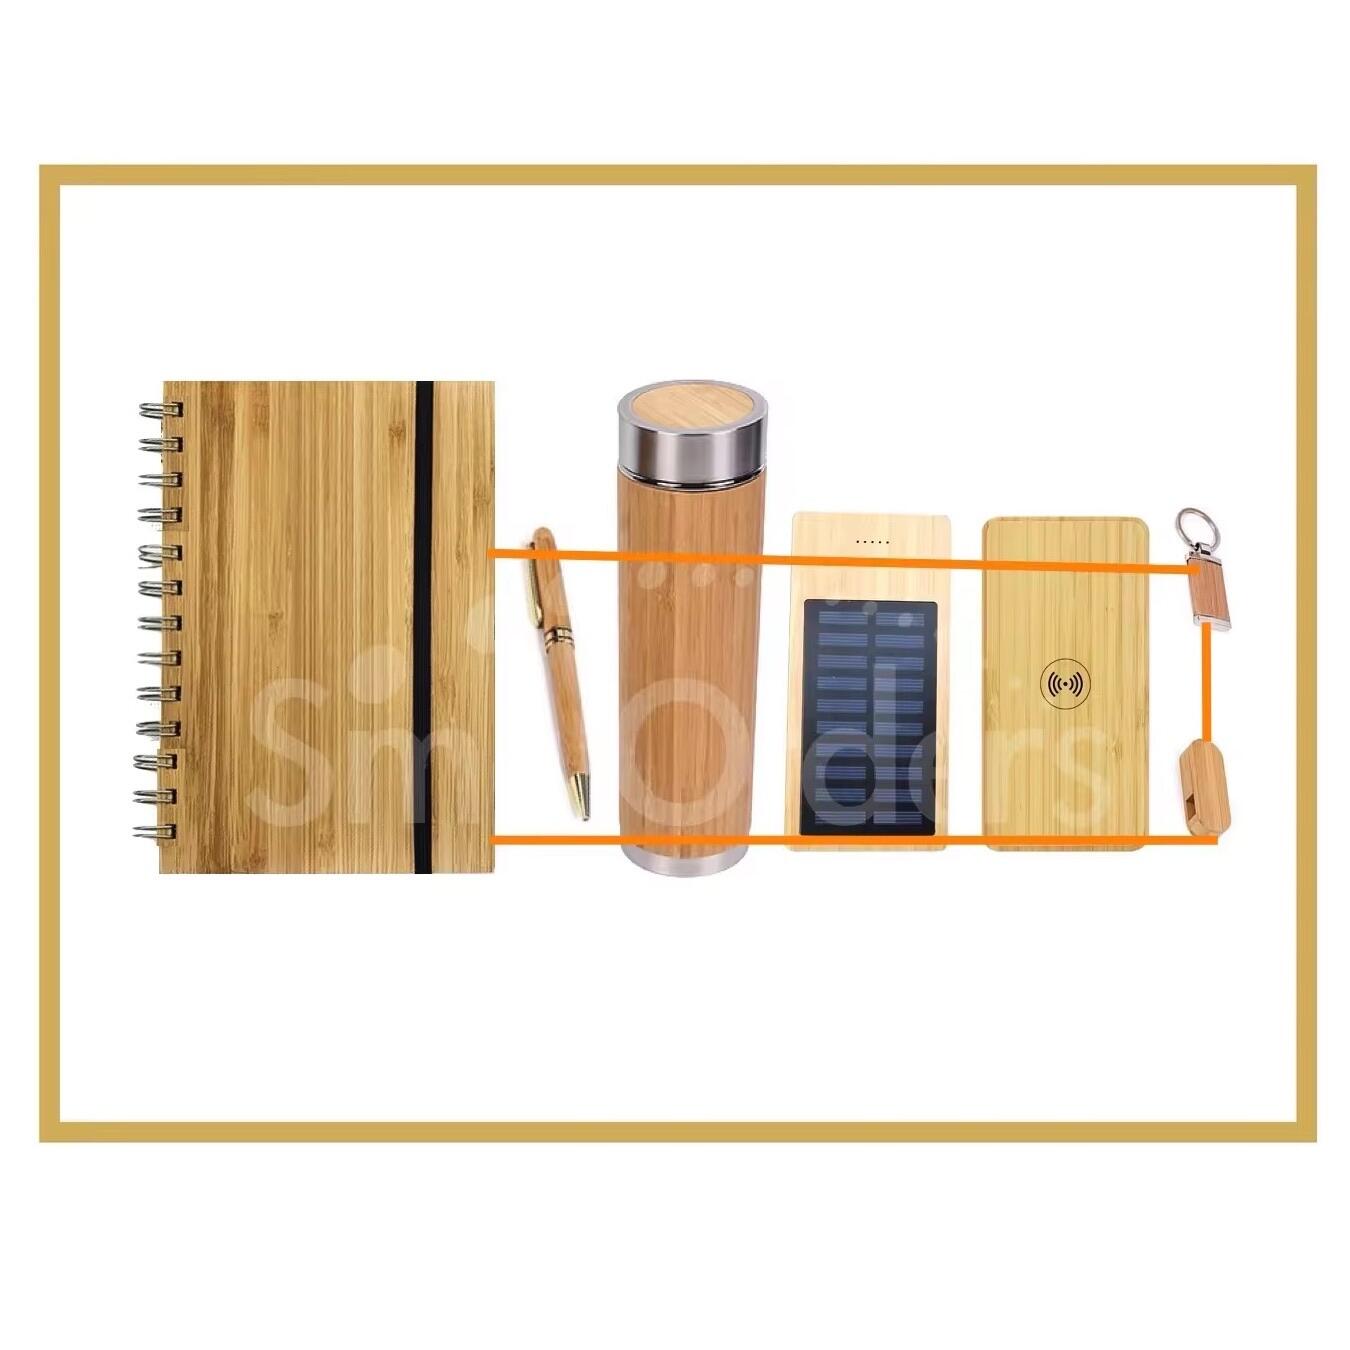 SmallOrders Corporate business gift sets for men women eco friendly blank With Custom Logo print promotional Christmas gift sets